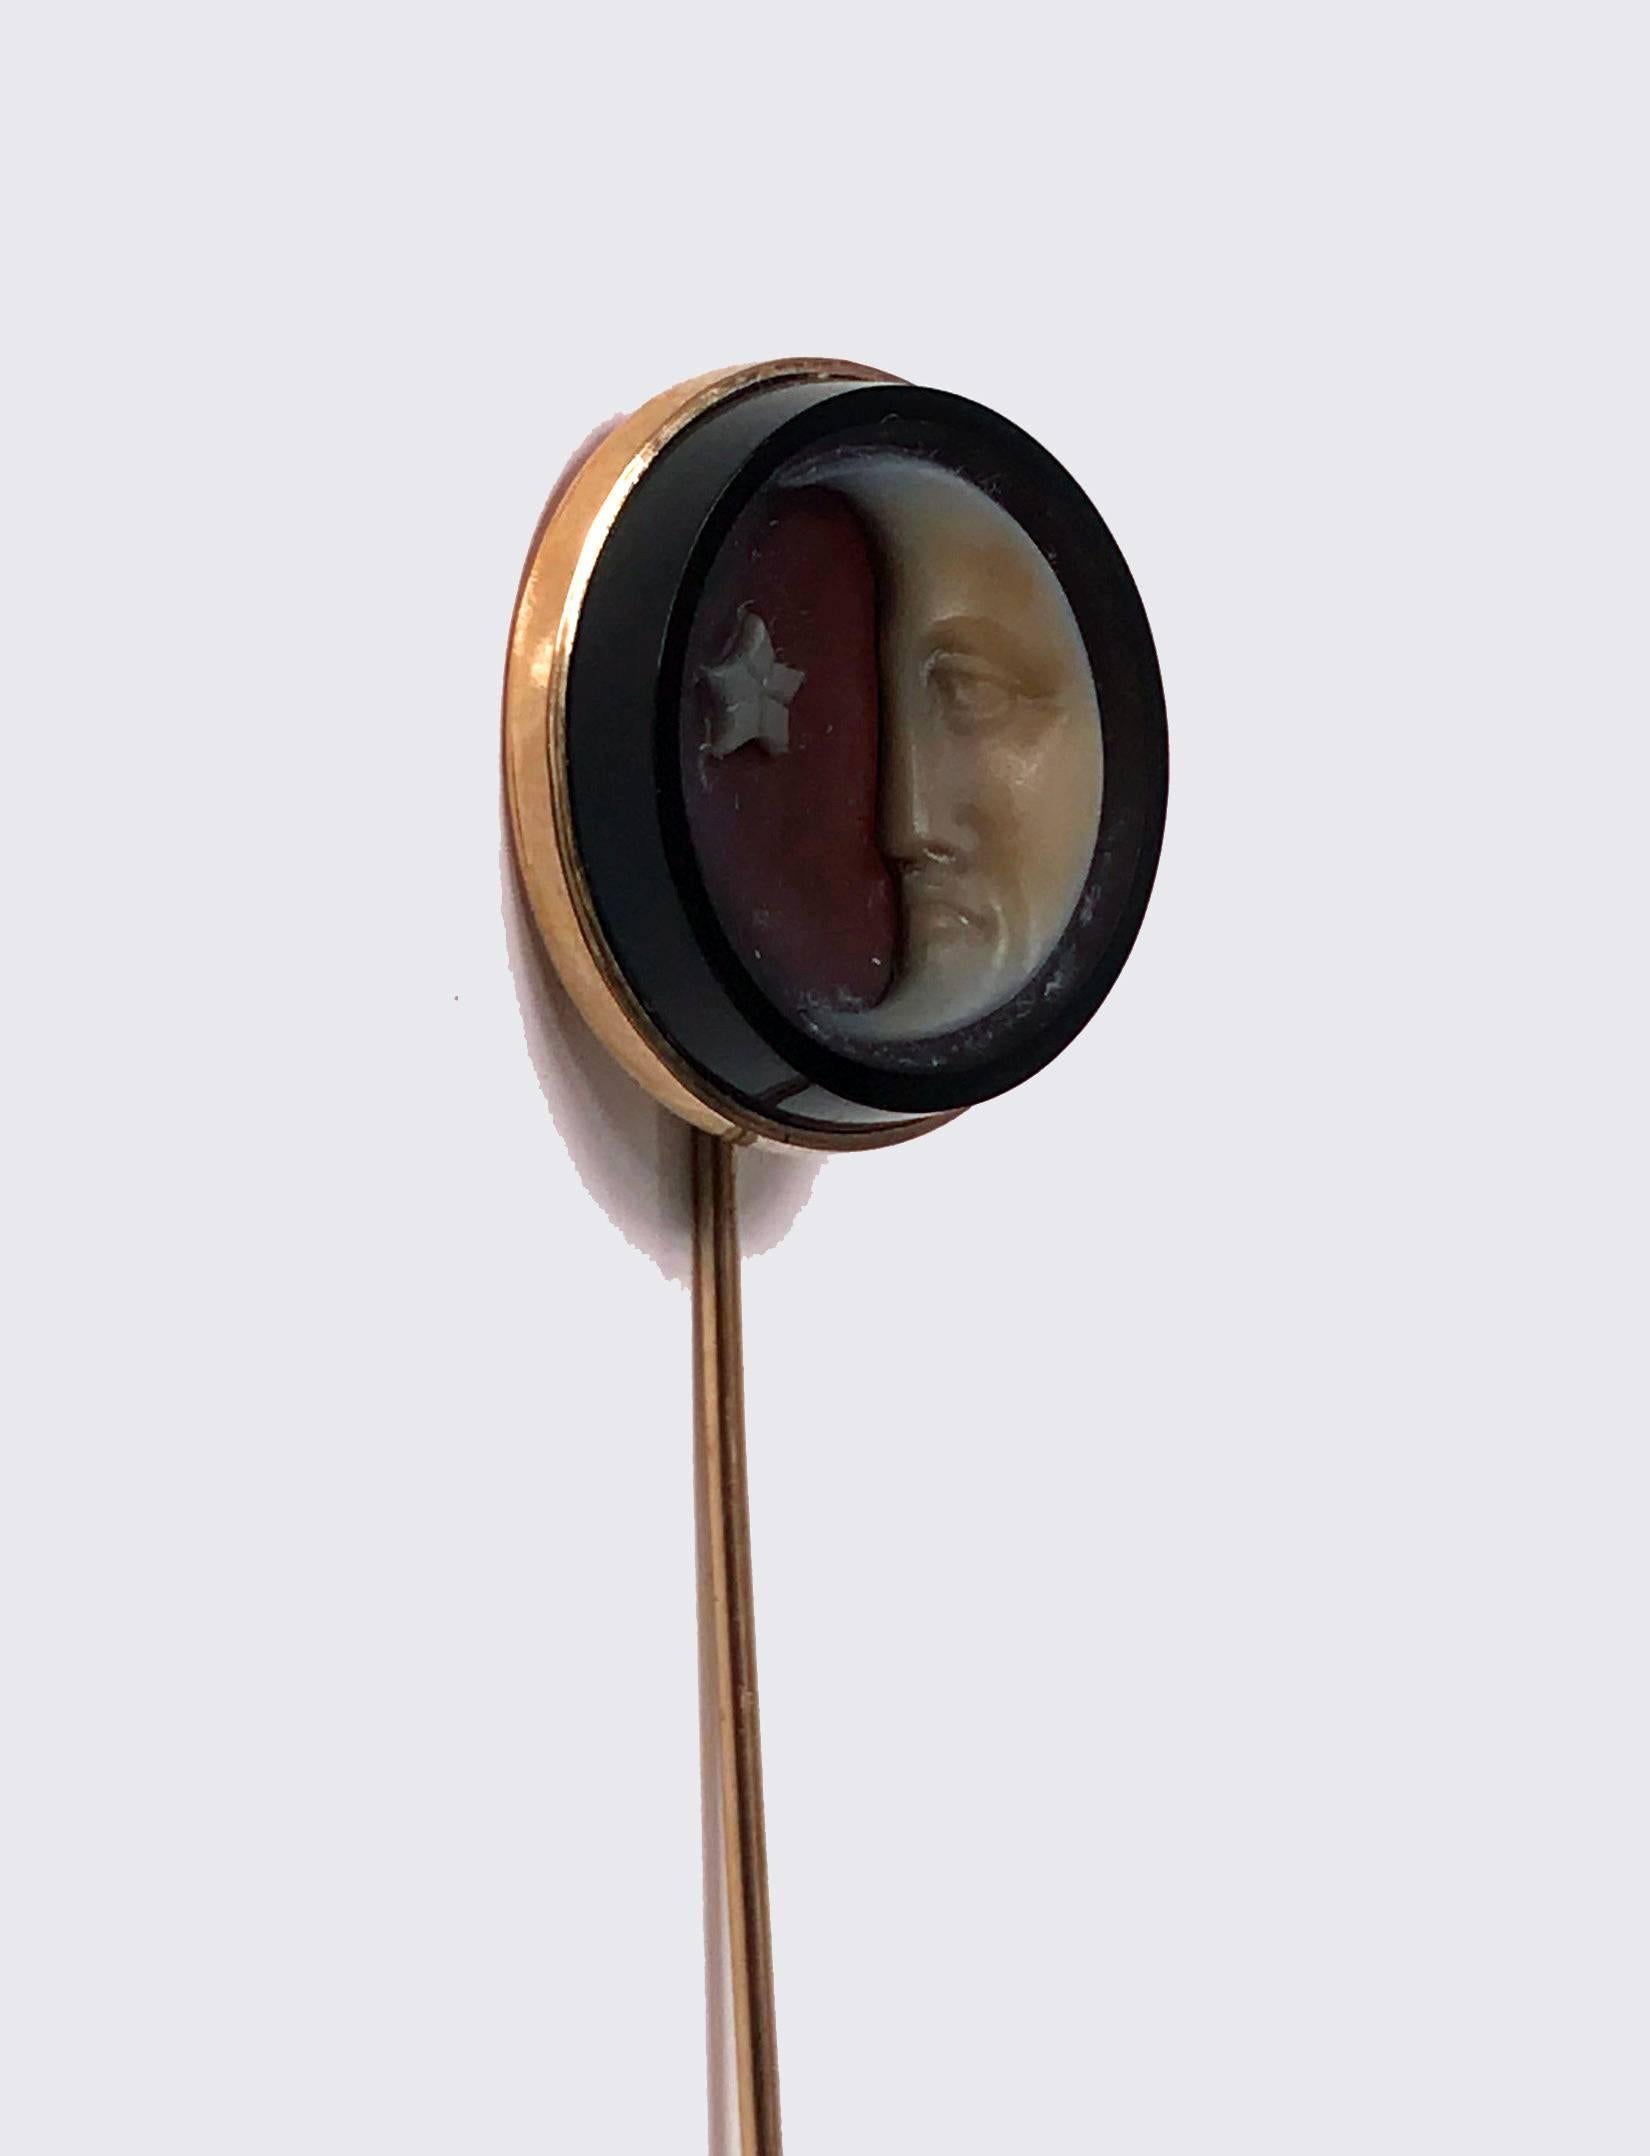 Rare antique gold and onyx cuvette stickpin, circa 1875. The stickpin, bezel set depicting the man in the moon and a star. Gold tests as 14-karat. Diameter of cuvette: Approximately 21.50 mm. Length of Stickpin: 2.25 inches. Ref: Skinners Fine